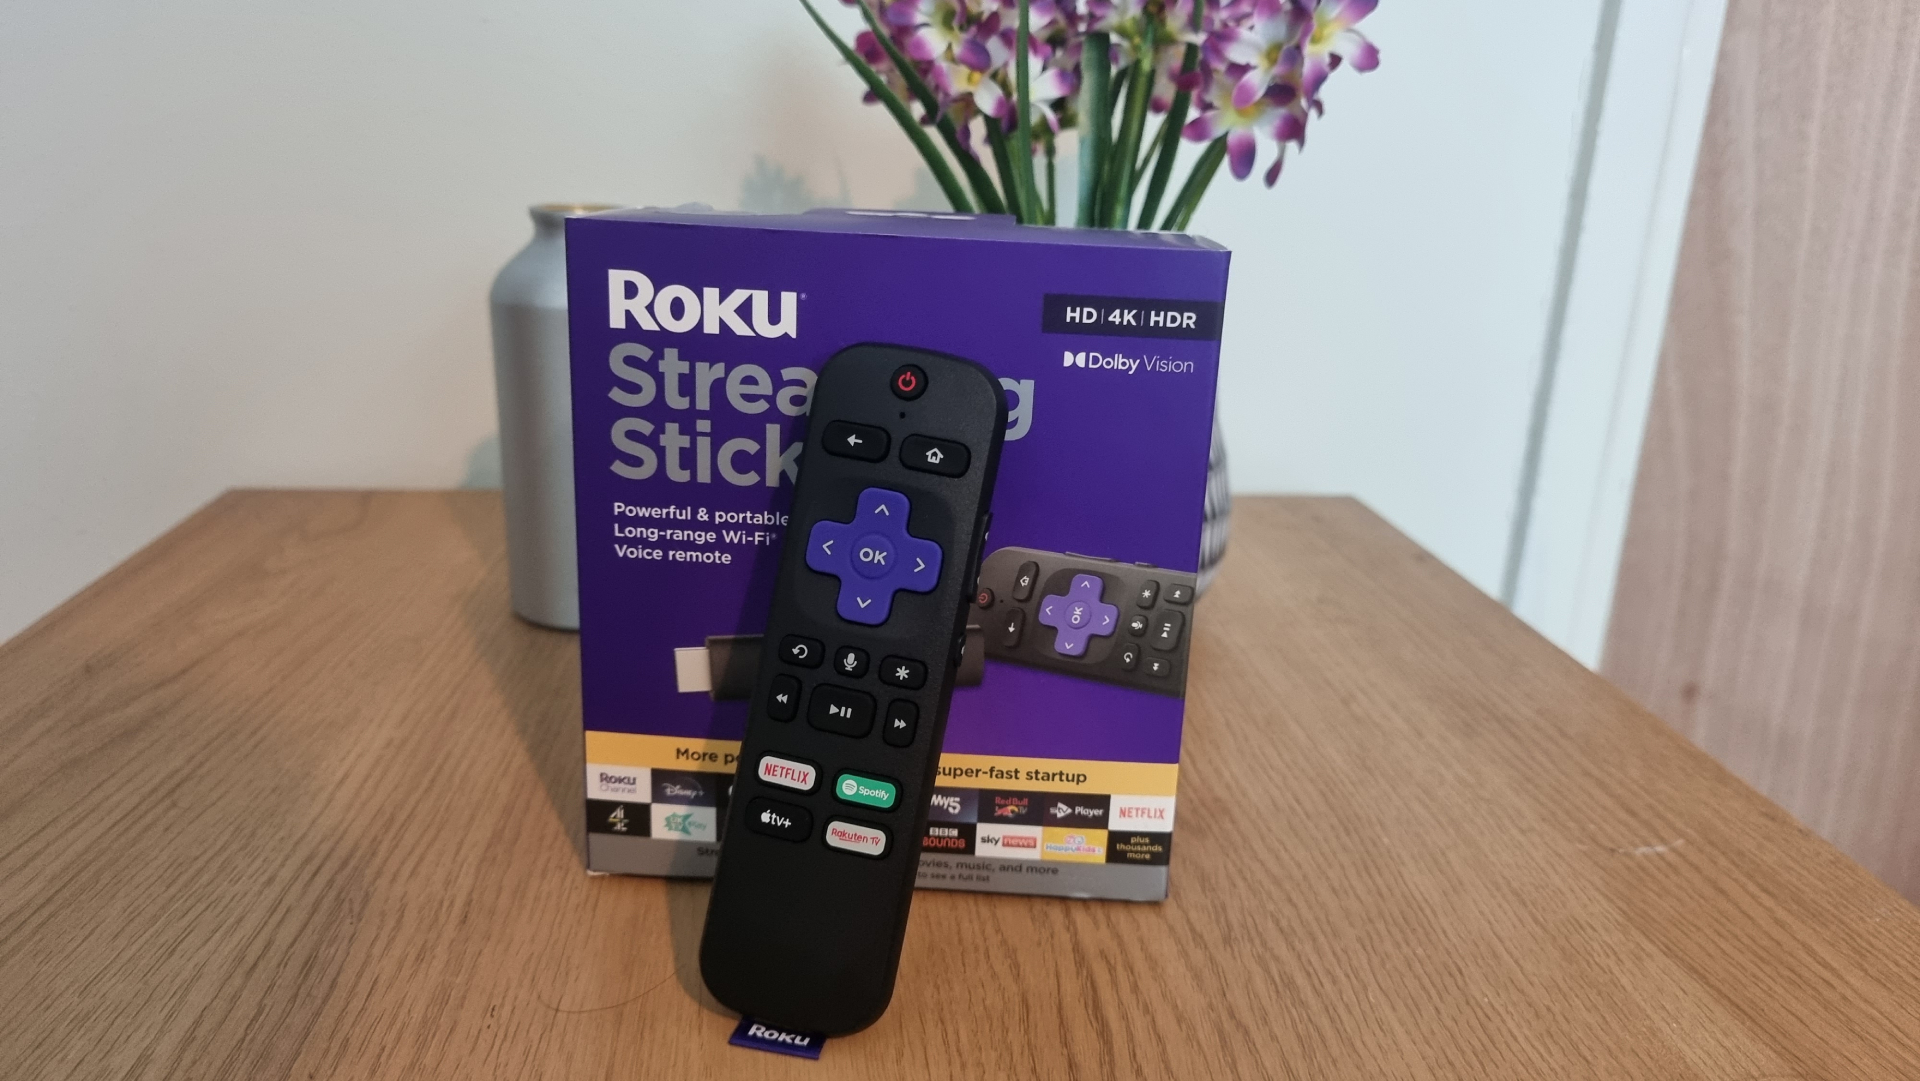 Roku Remote displayed on a table in front of the box